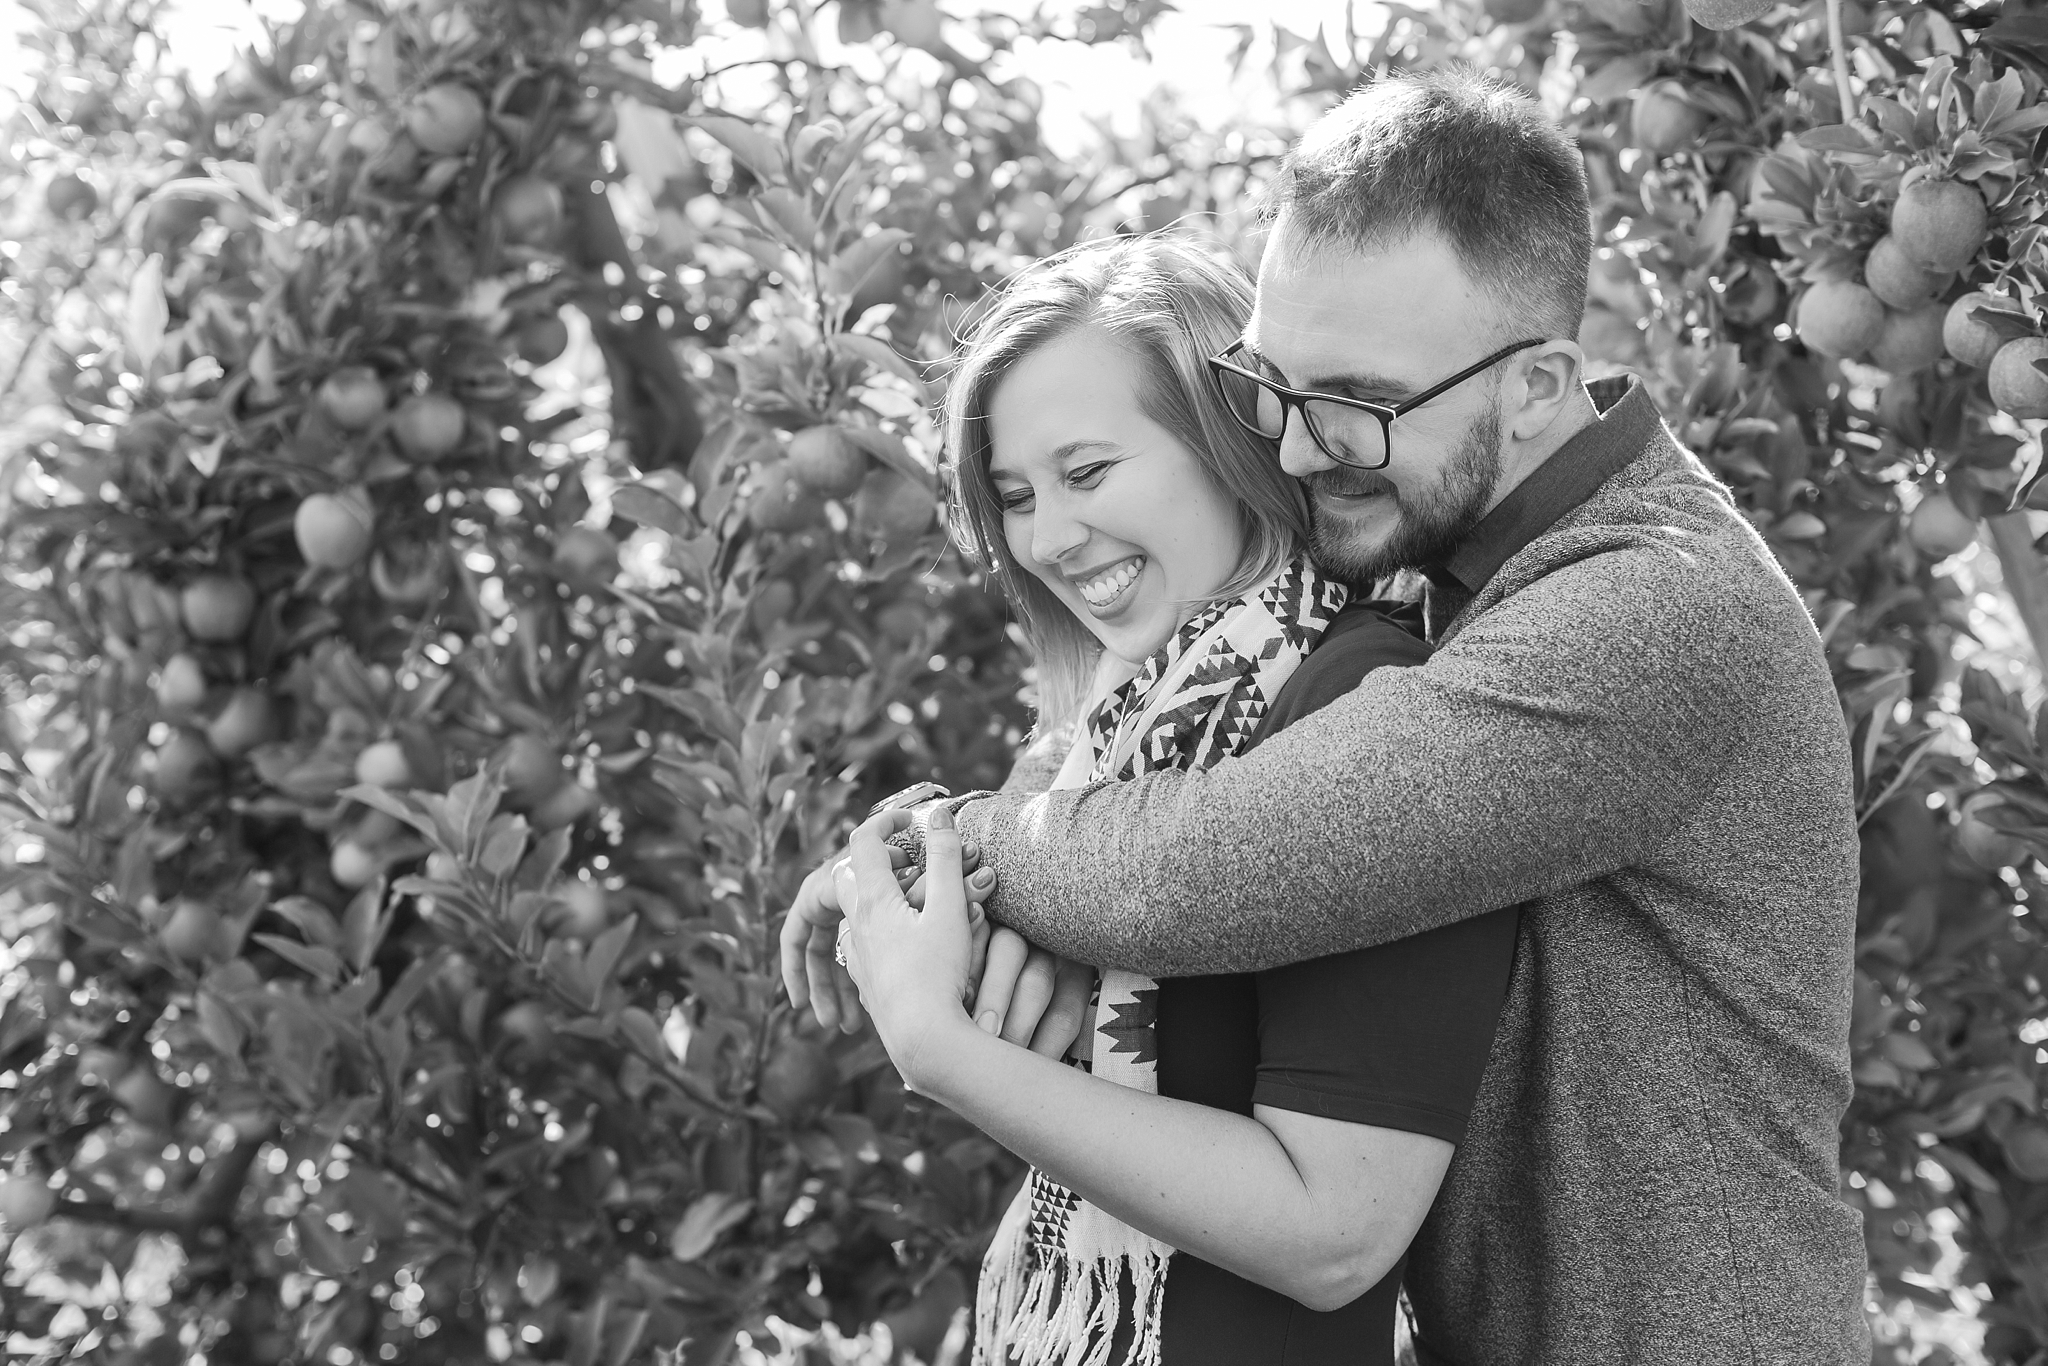 playful-fall-engagement-photos-at-hy's-cider-mill-ochard-in-bruce-township-michigan-by-courtney-carolyn-photography_0008.jpg